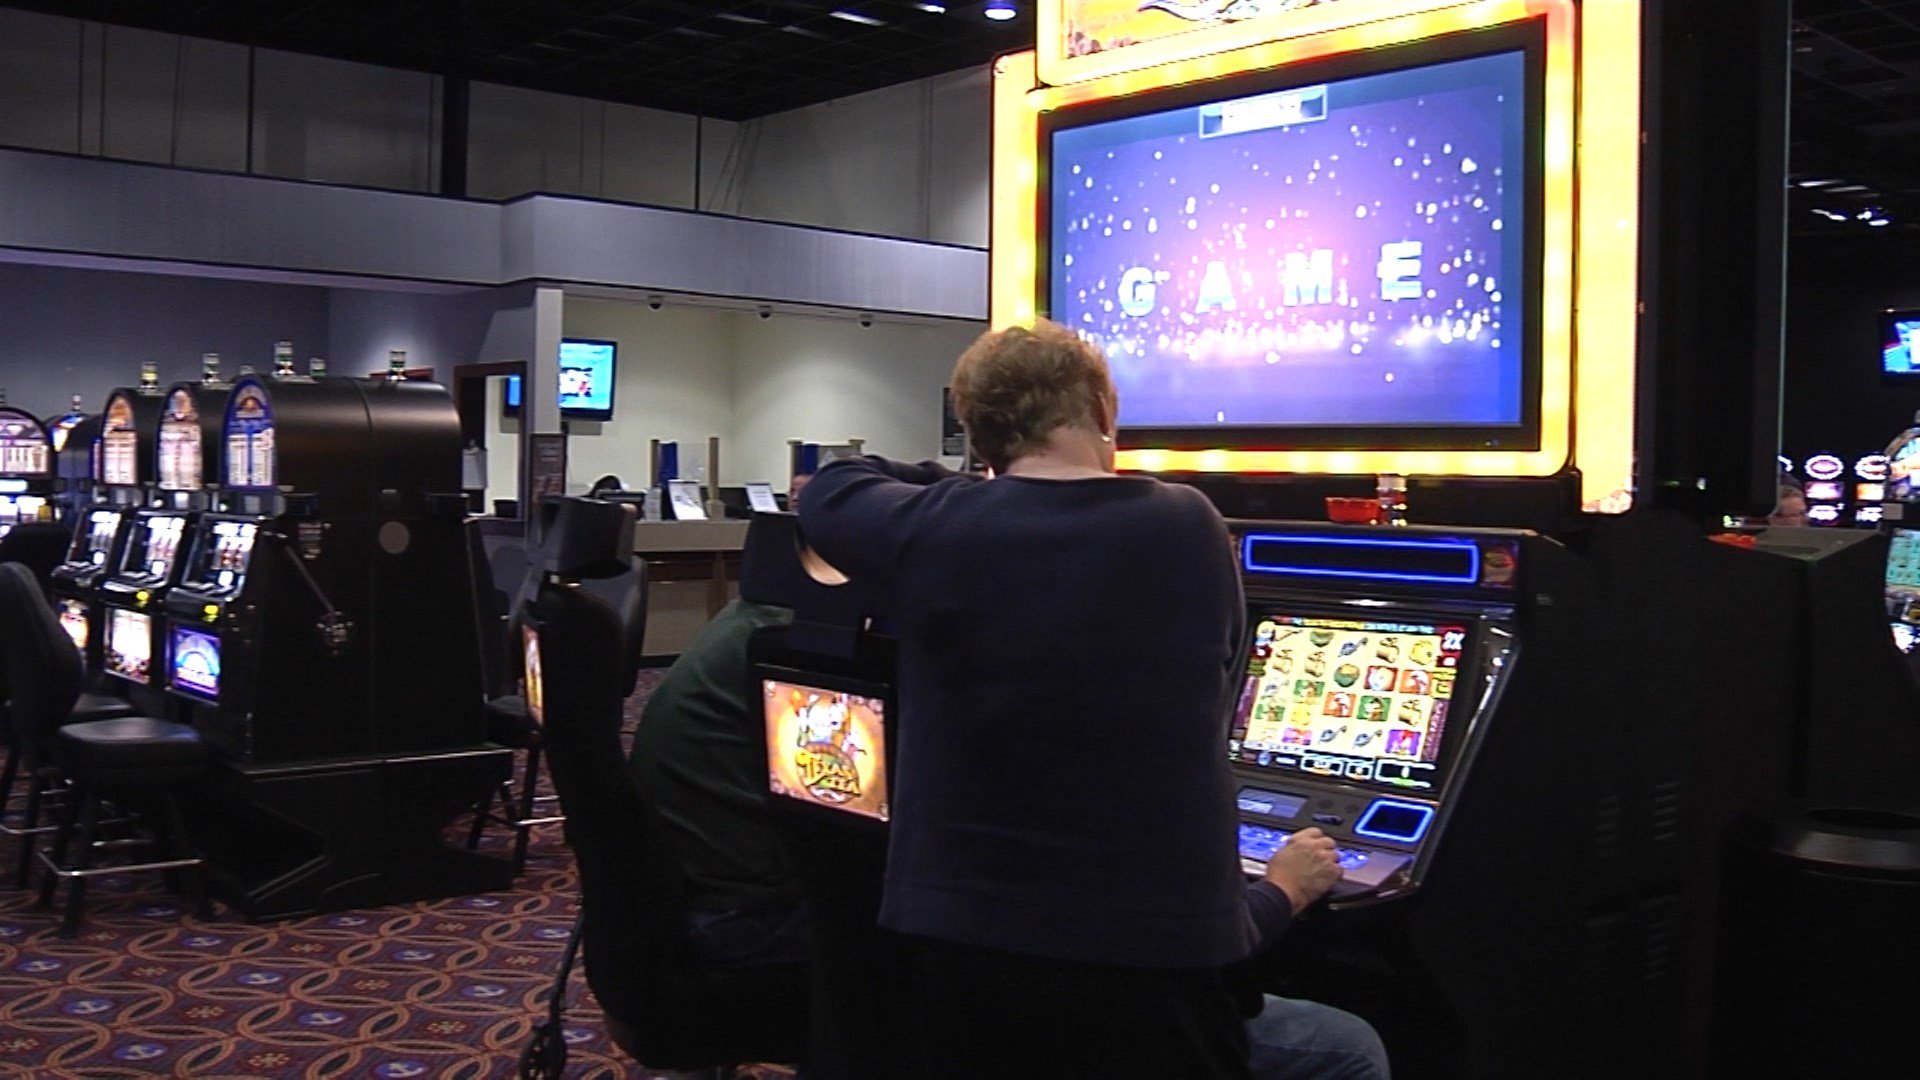 Presque Isle Downs & Casino Temporary Closes Tuesday after Upgrade Issues